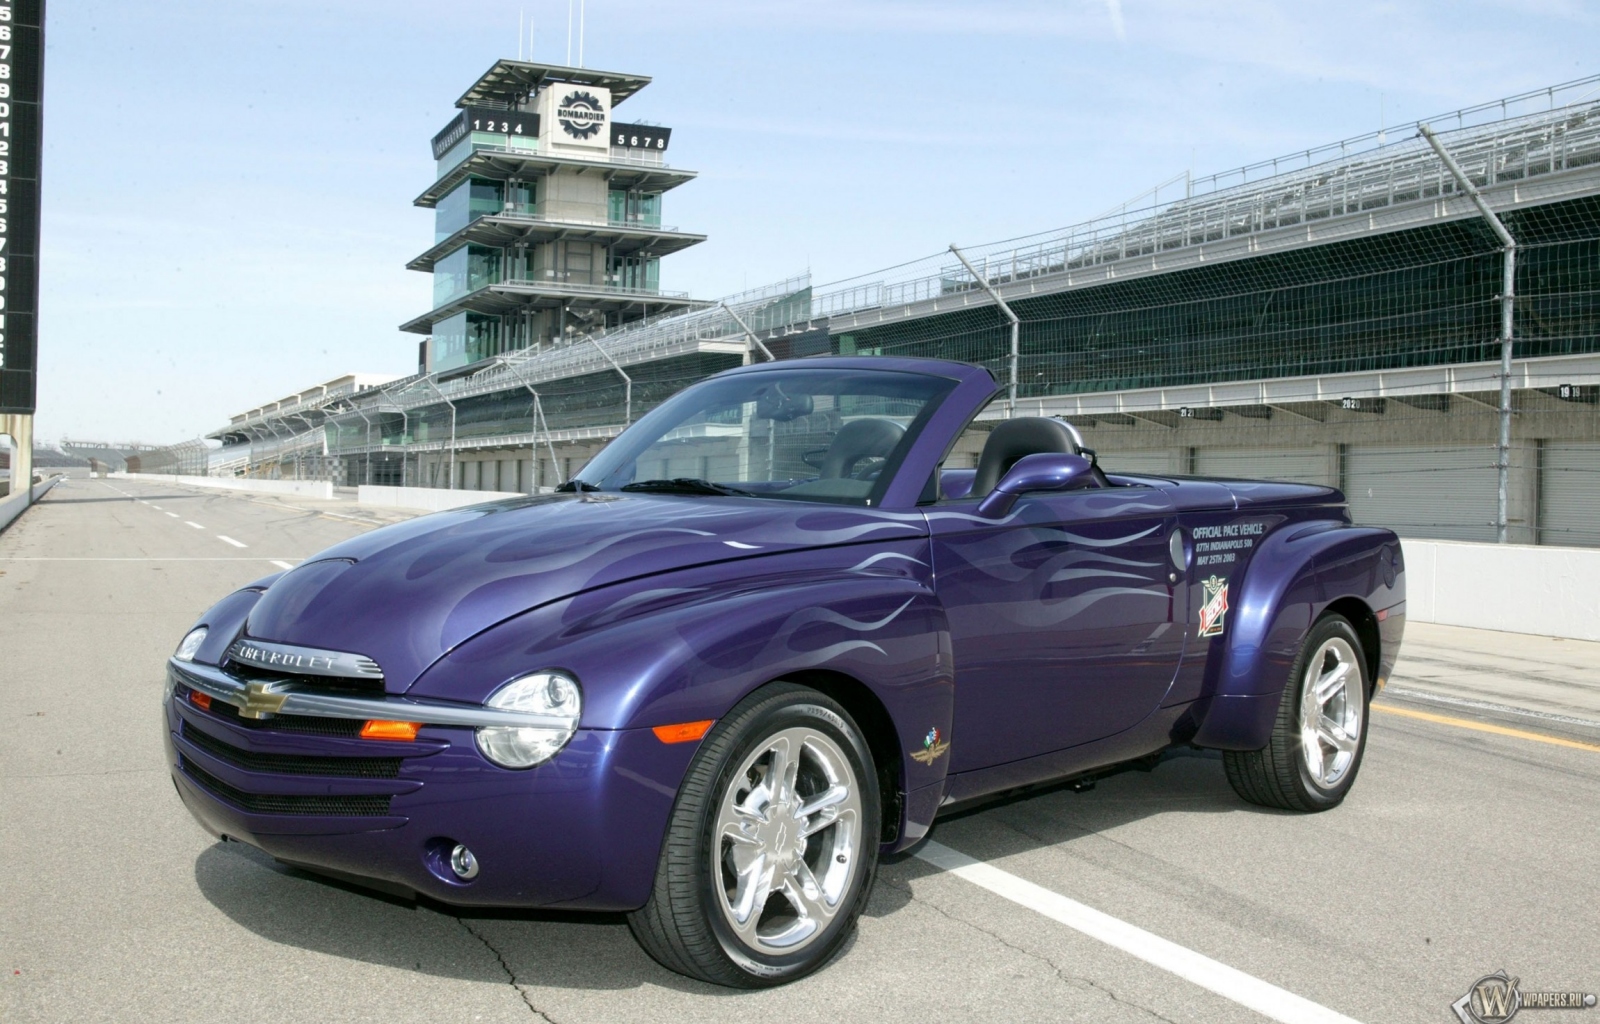 Chevrolet SSR Indianapolis Pace Car 1600x1024